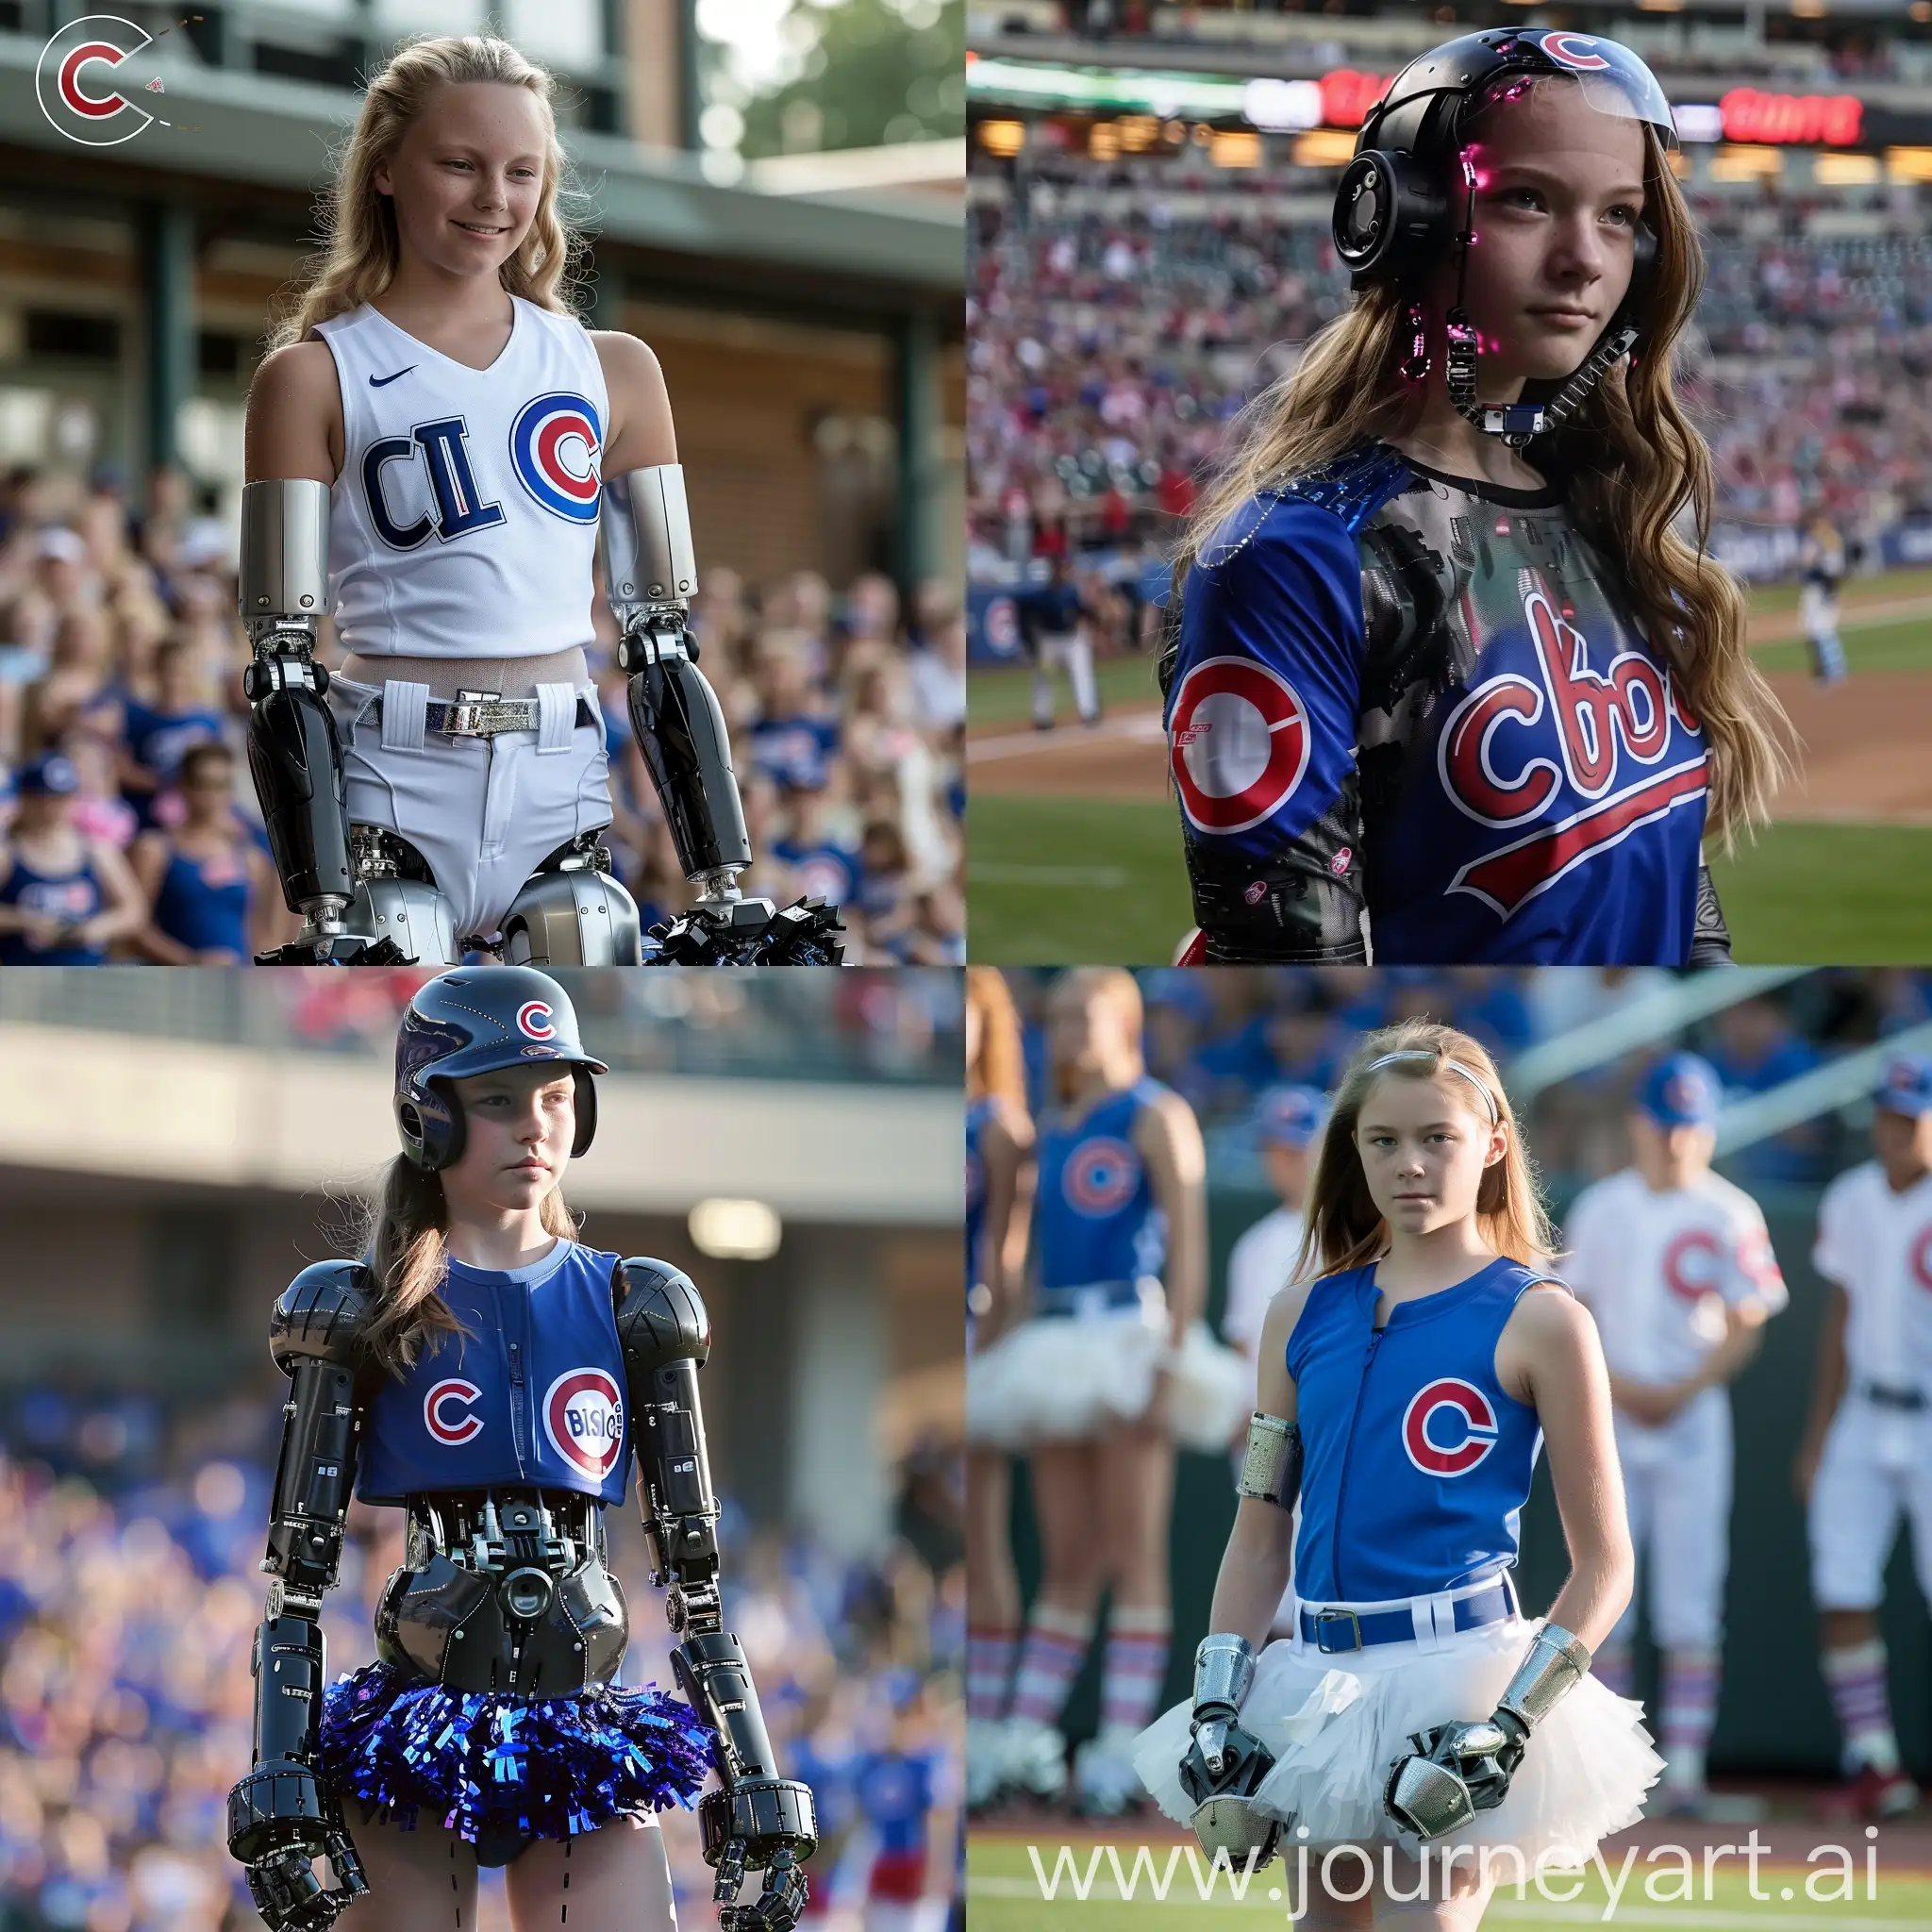 Chicago Cubs 13-14 year old cheerleader, turns out to be a robot, malfunctioning